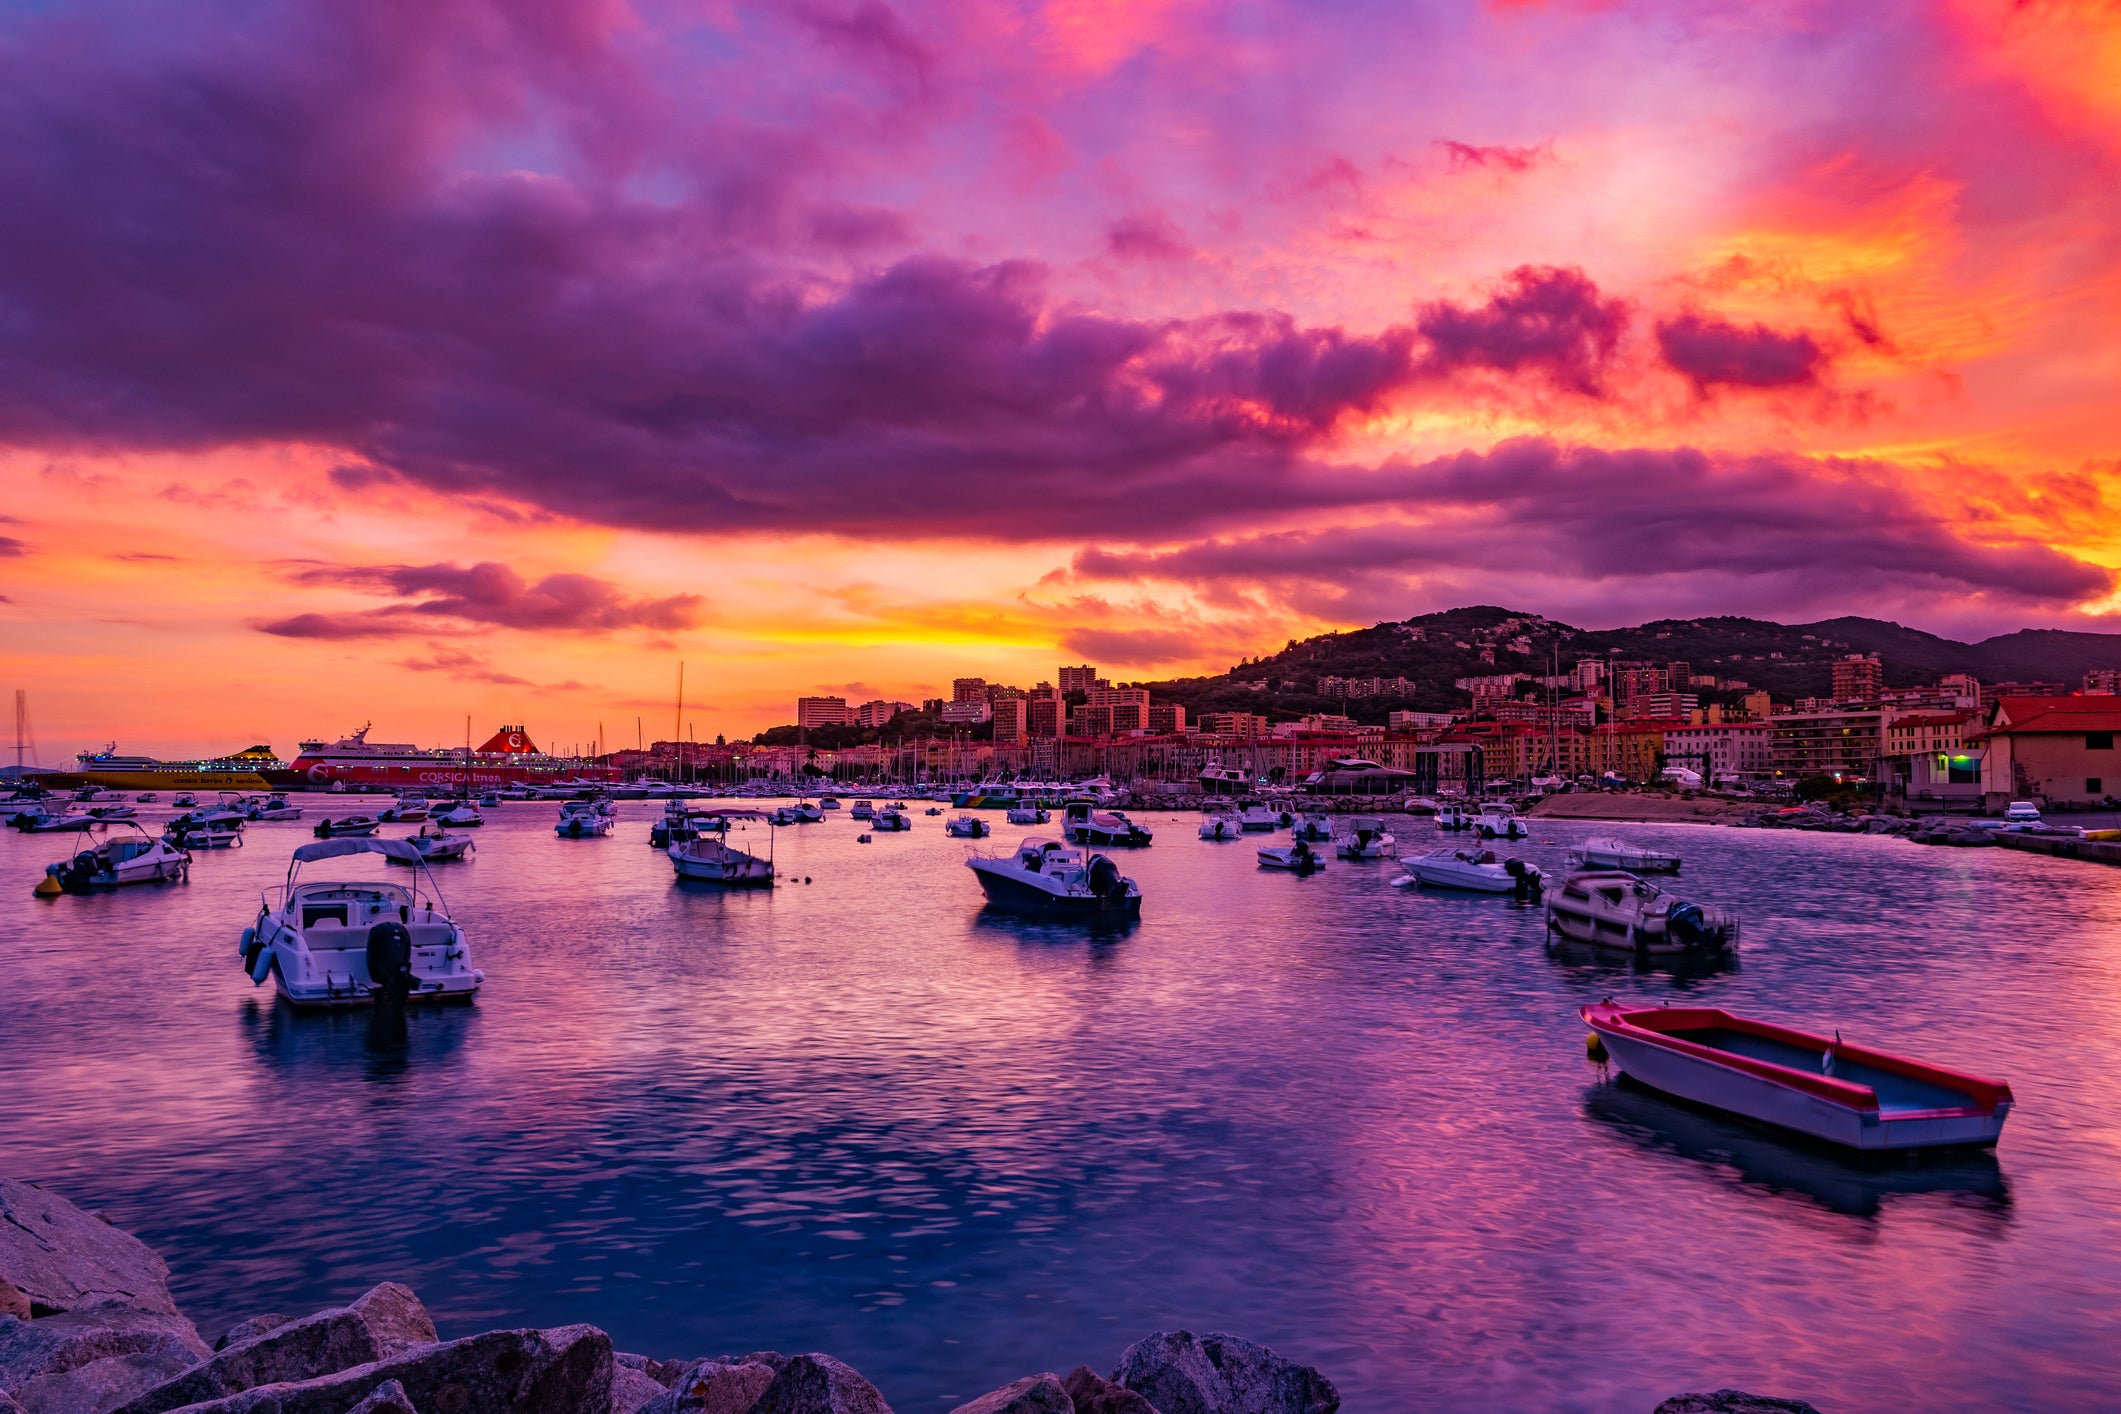 Sunset in Corsica